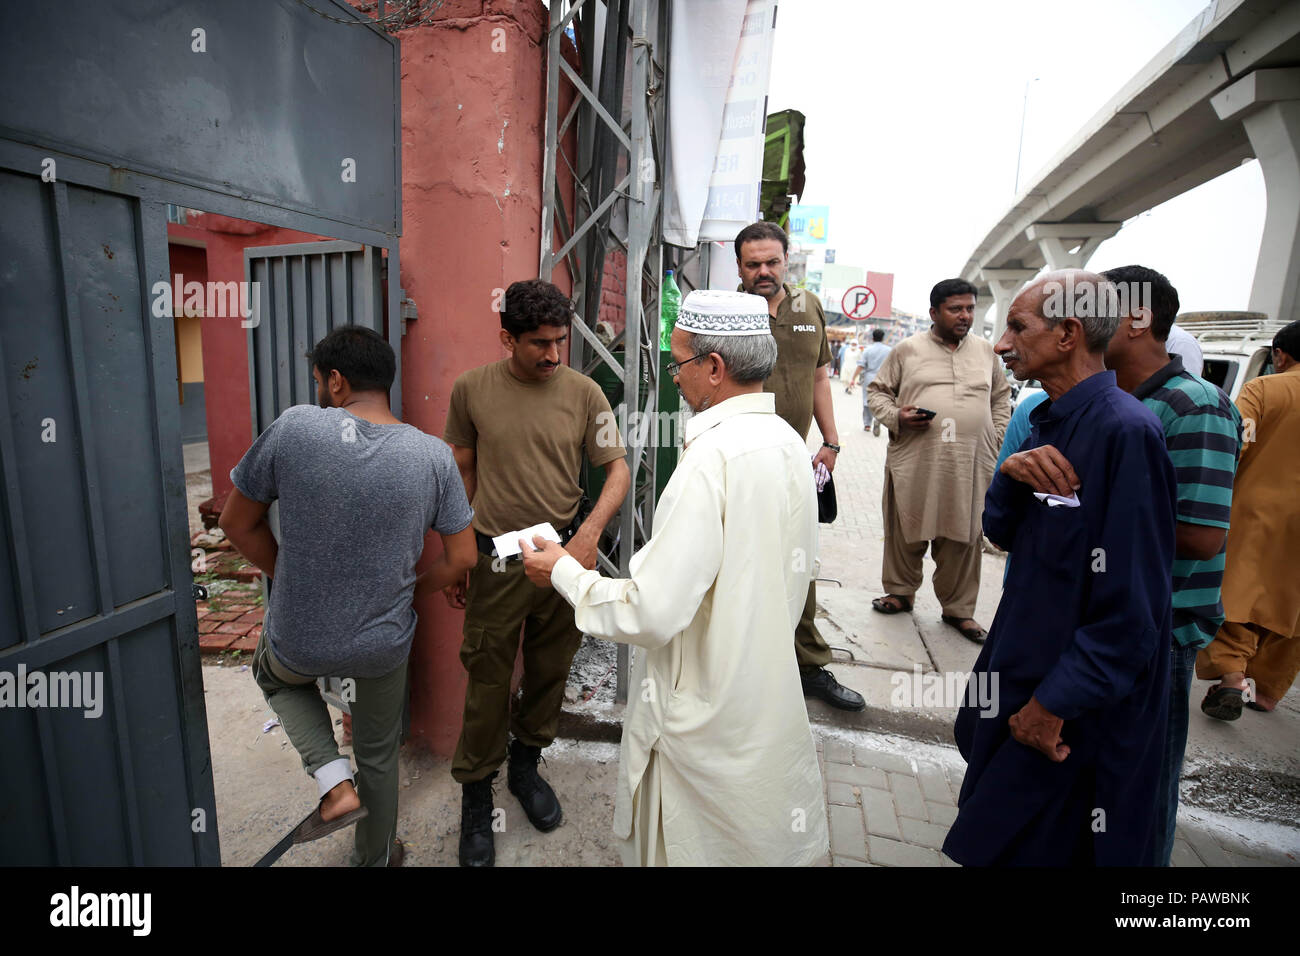 Rawalpindi, Pakistan. 25th July, 2018. People enter a polling station to cast vote during the general elections in Rawalpindi, Pakistan, on July 25, 2018. Pakistan held the general elections on Wednesday. Credit: Ahmad Kamal/Xinhua/Alamy Live News Stock Photo